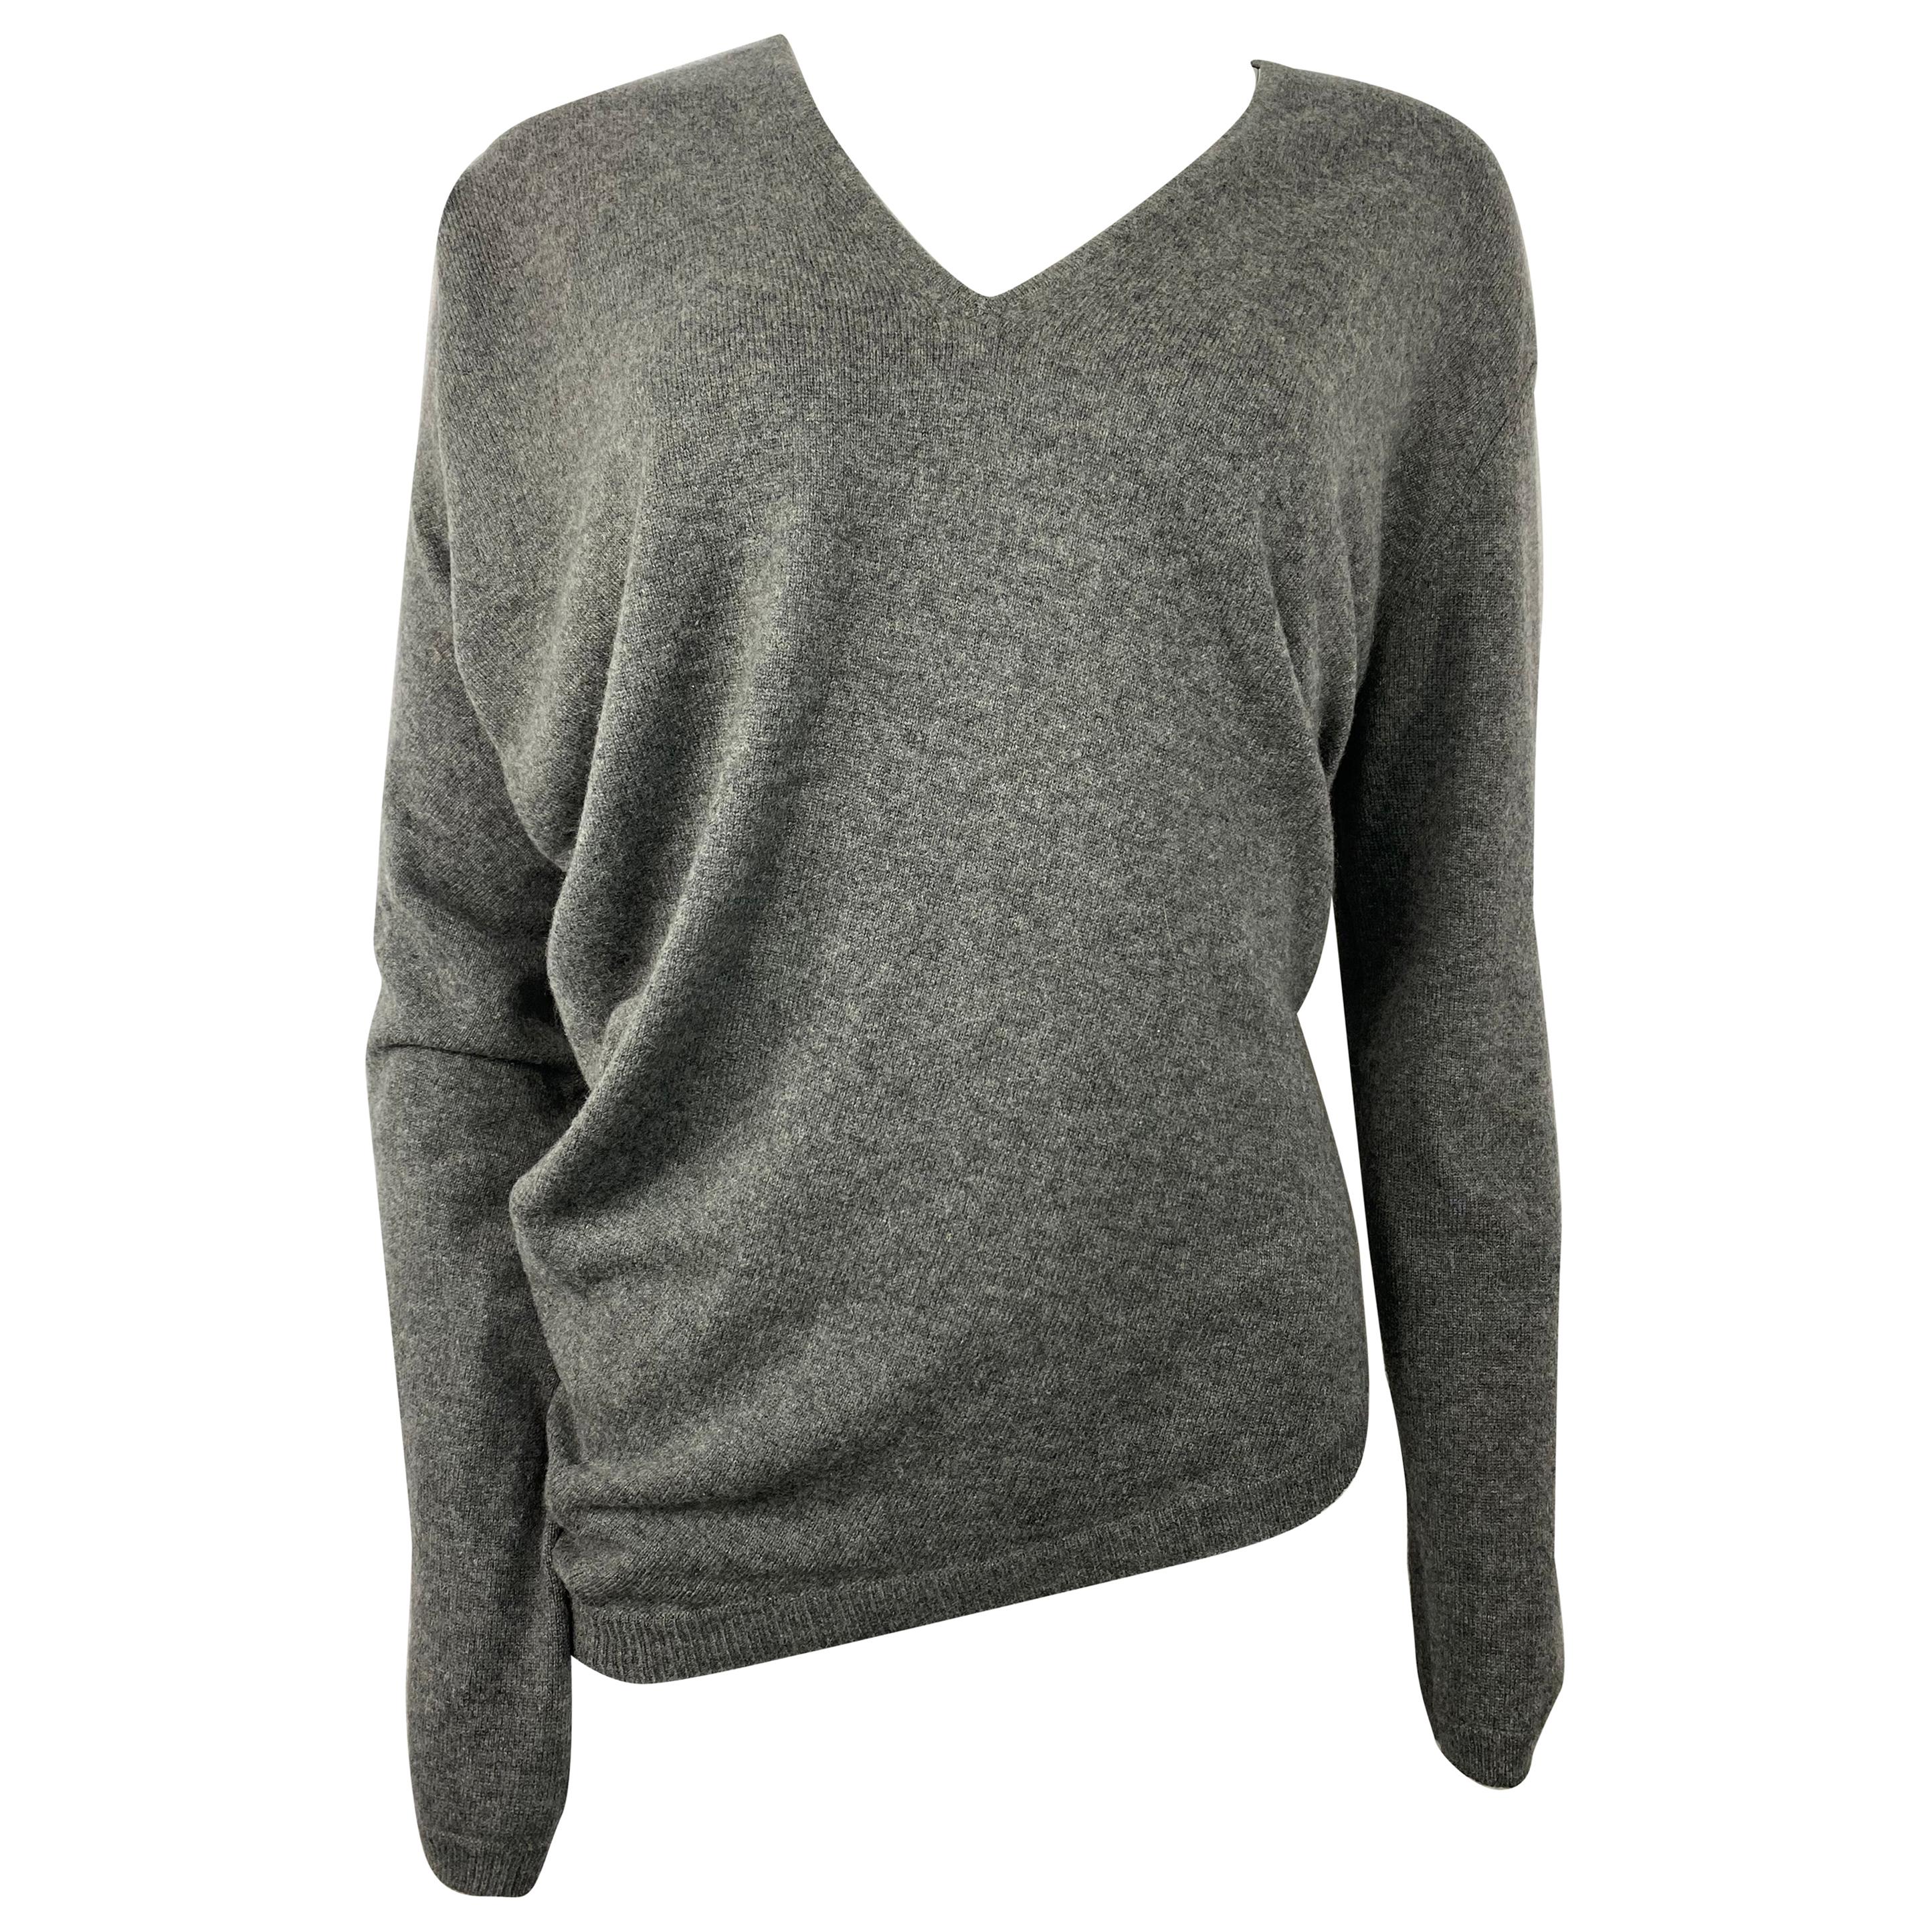 Barbara Bui Grey Cashmere Long Sleeves Pullover Sweater Size S 